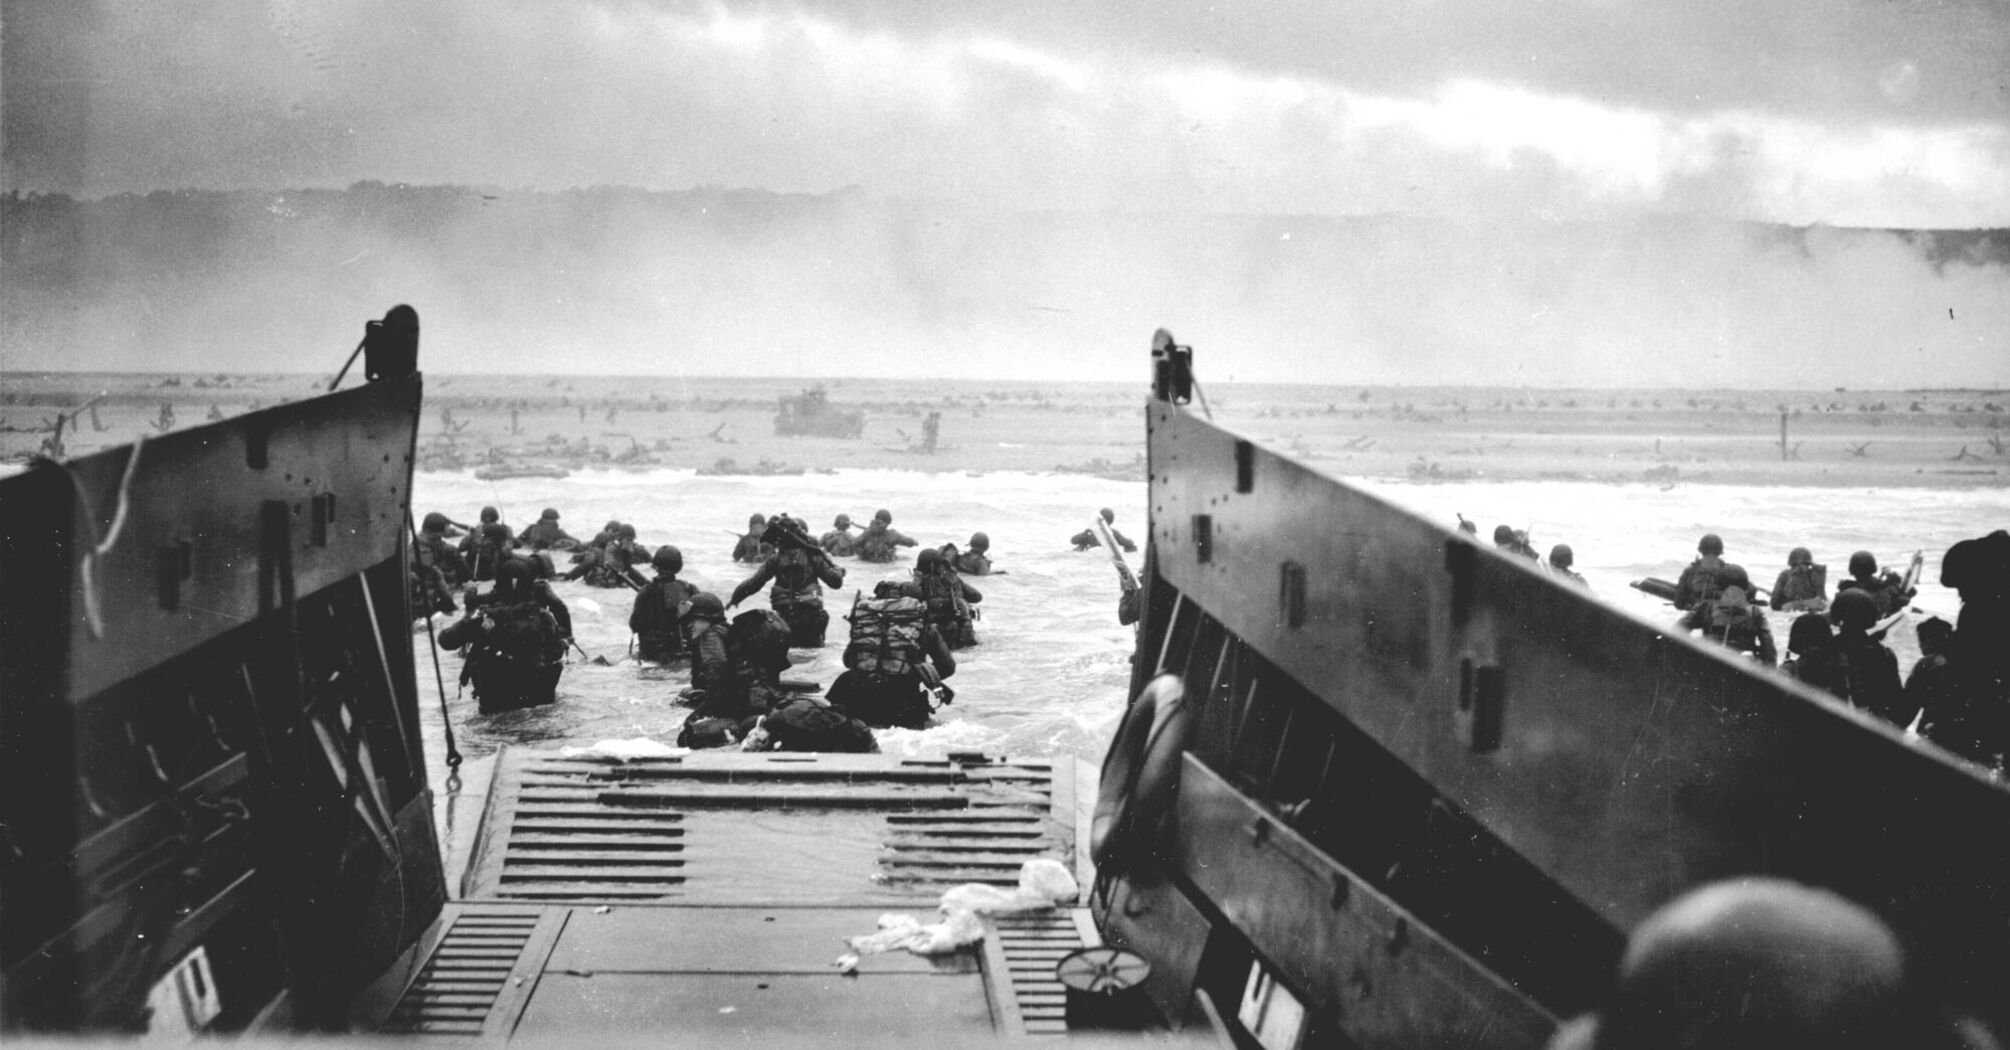 Black and white photograph of the landing of Allied troops on the beach during D-Day, with soldiers disembarking from landing craft into the sea under fire 